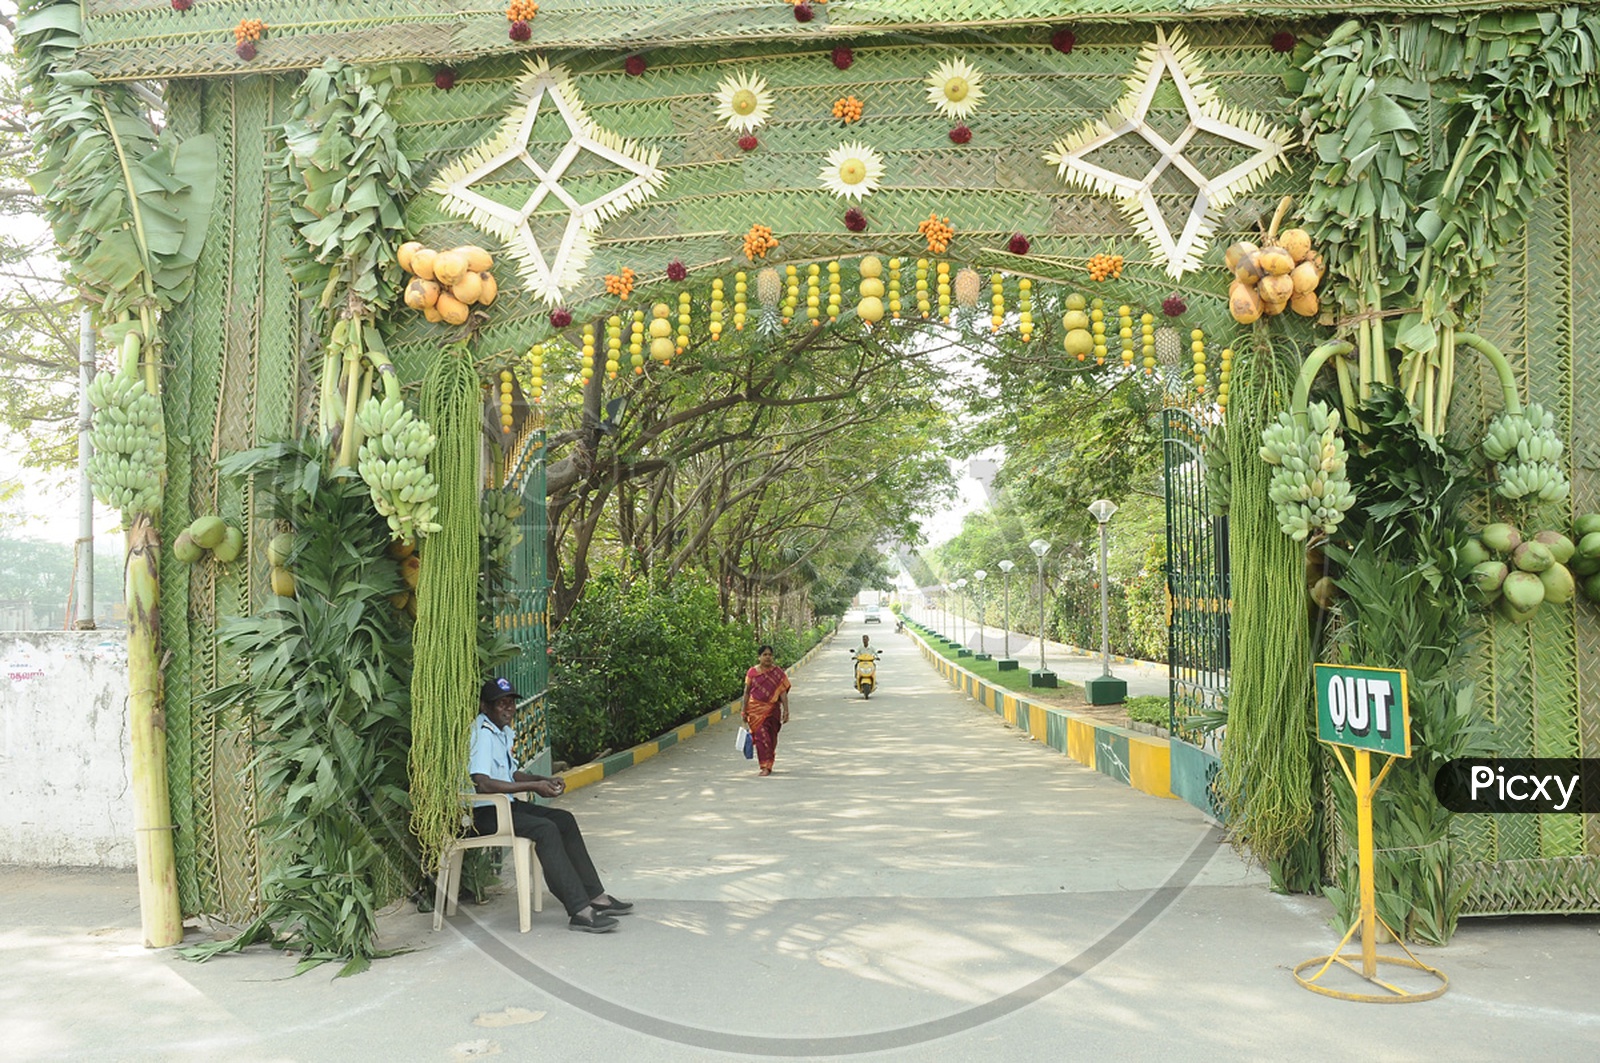 Entrance decorated with Coconut leaves